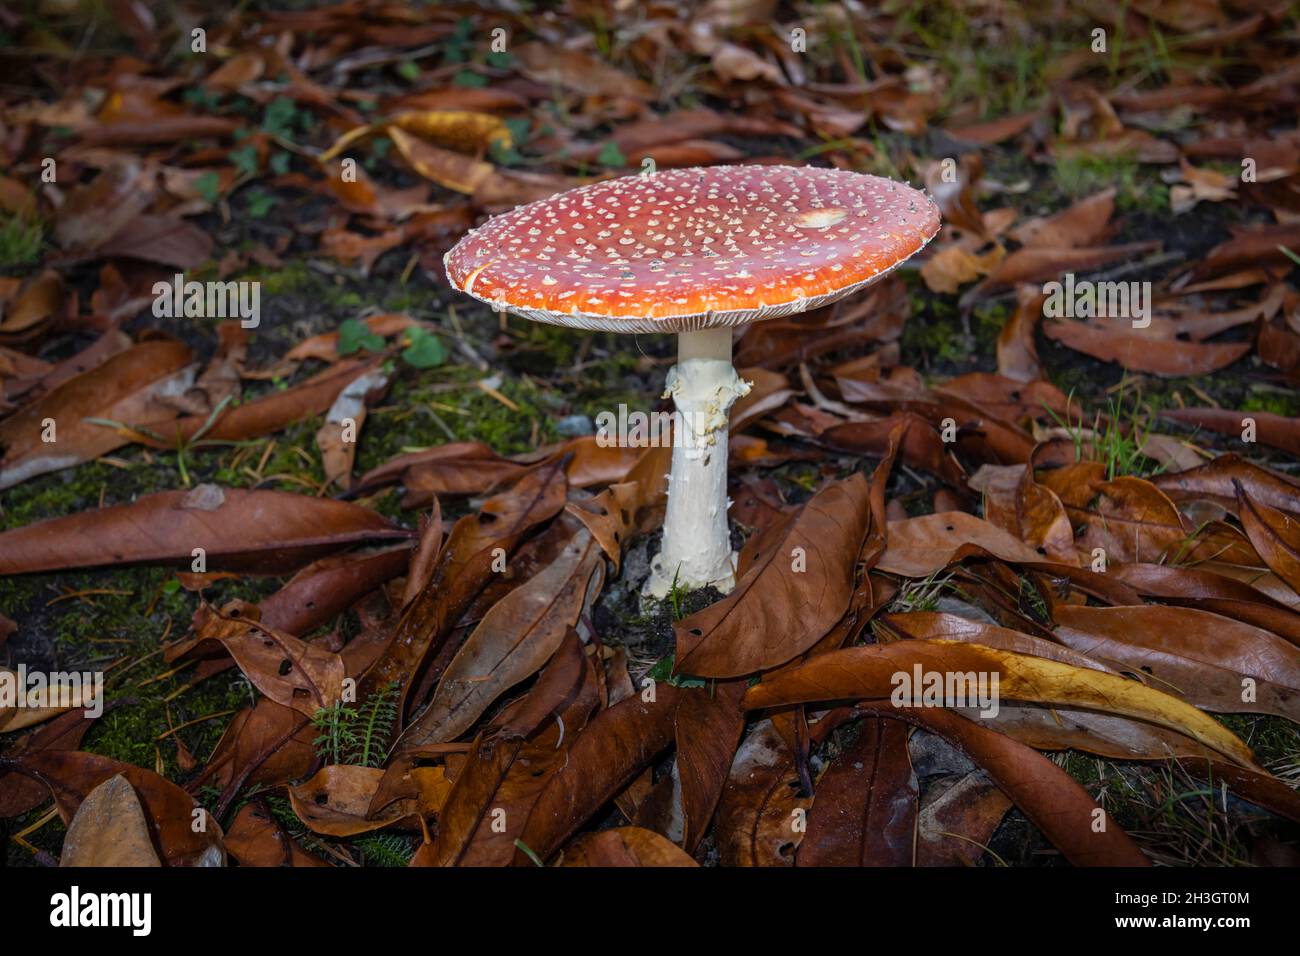 Red and white fruiting body of poisonous toadstool fly agaric (Amanita muscaria) growing in autumn in Surrey, south-east England amongst fallen leaves Stock Photo